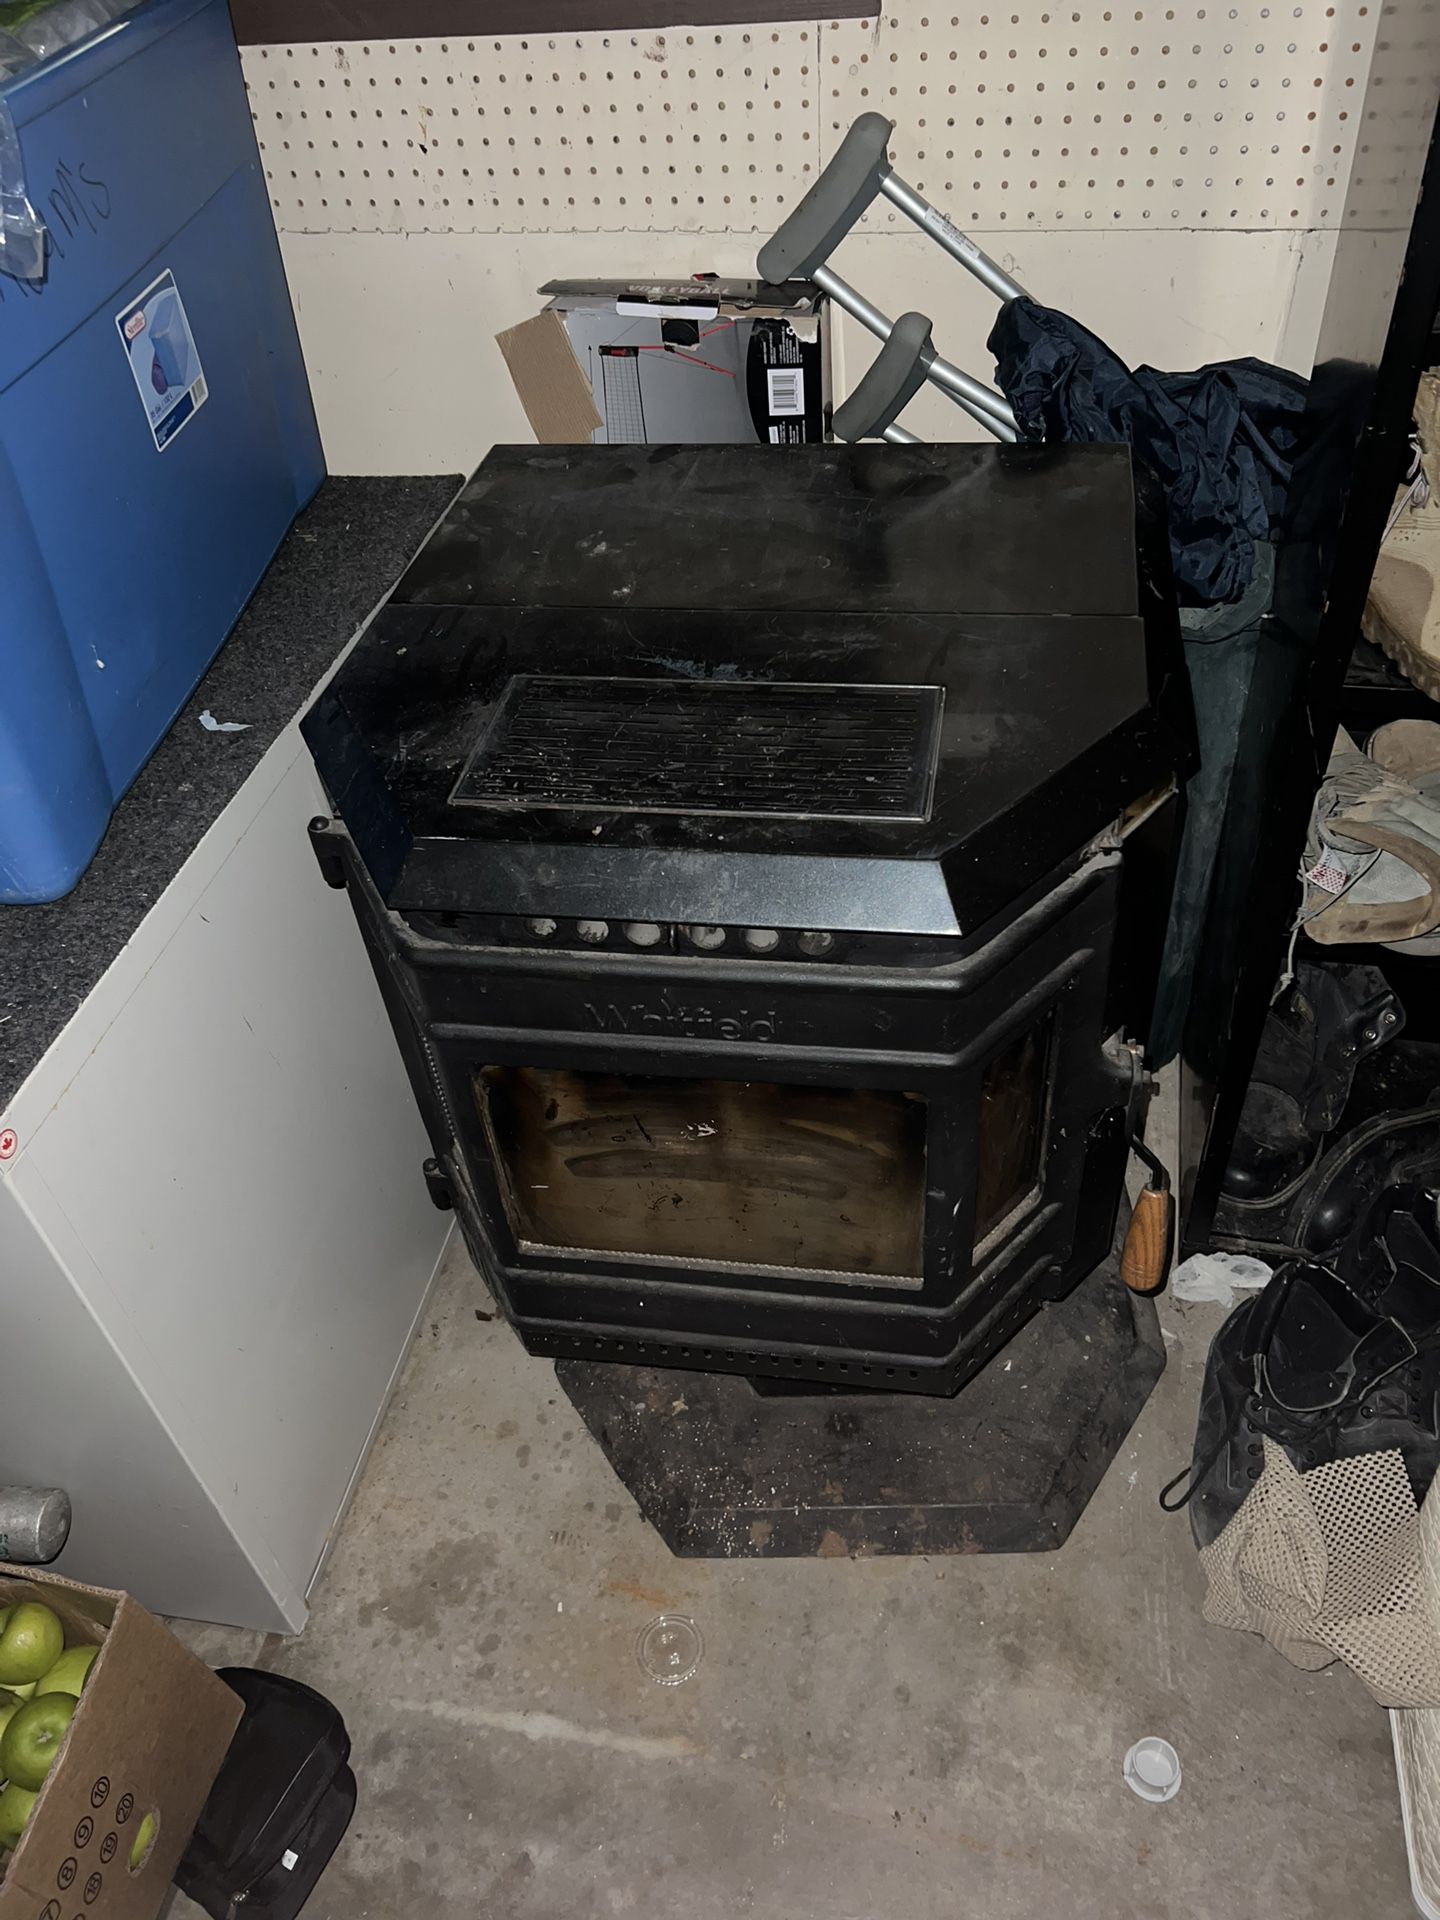 Whitfield Pellet Stove